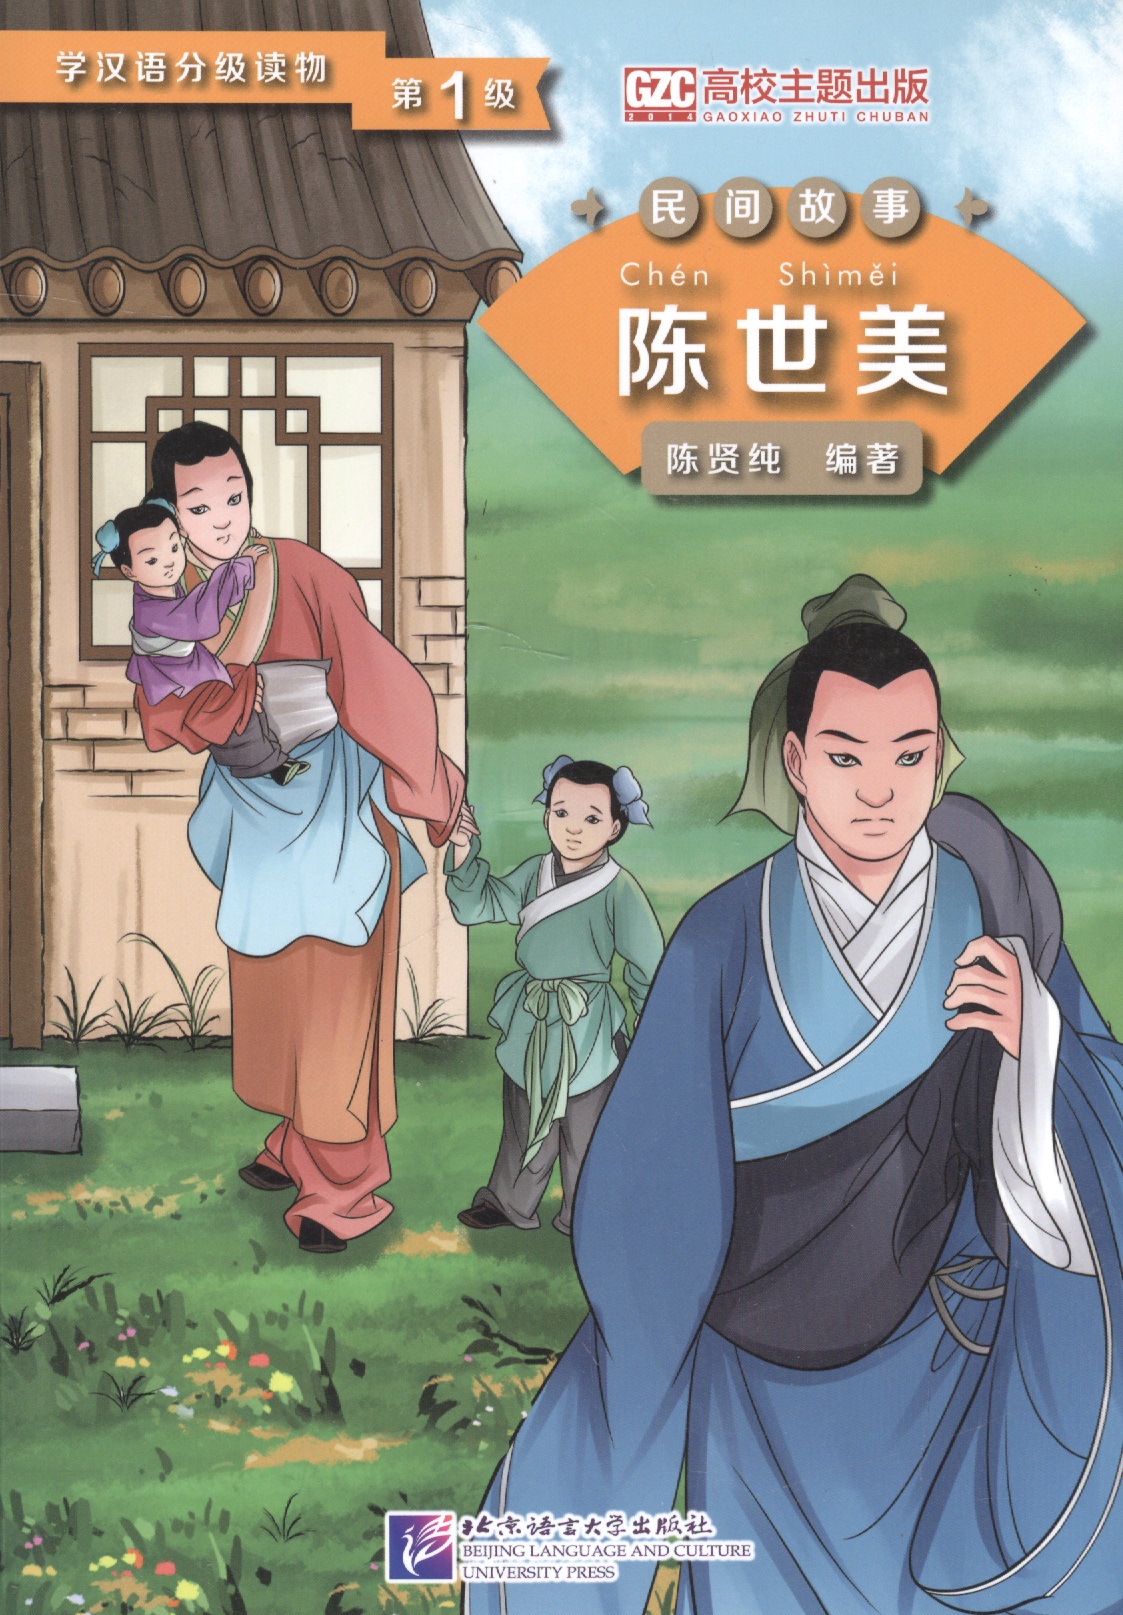 chen carol wang xiaopeng chinese graded readers beginner family my dad and i cd Graded Readers for Chinese Language Learners (Folktales): Chen Shimei. Адаптированная книга для чтения